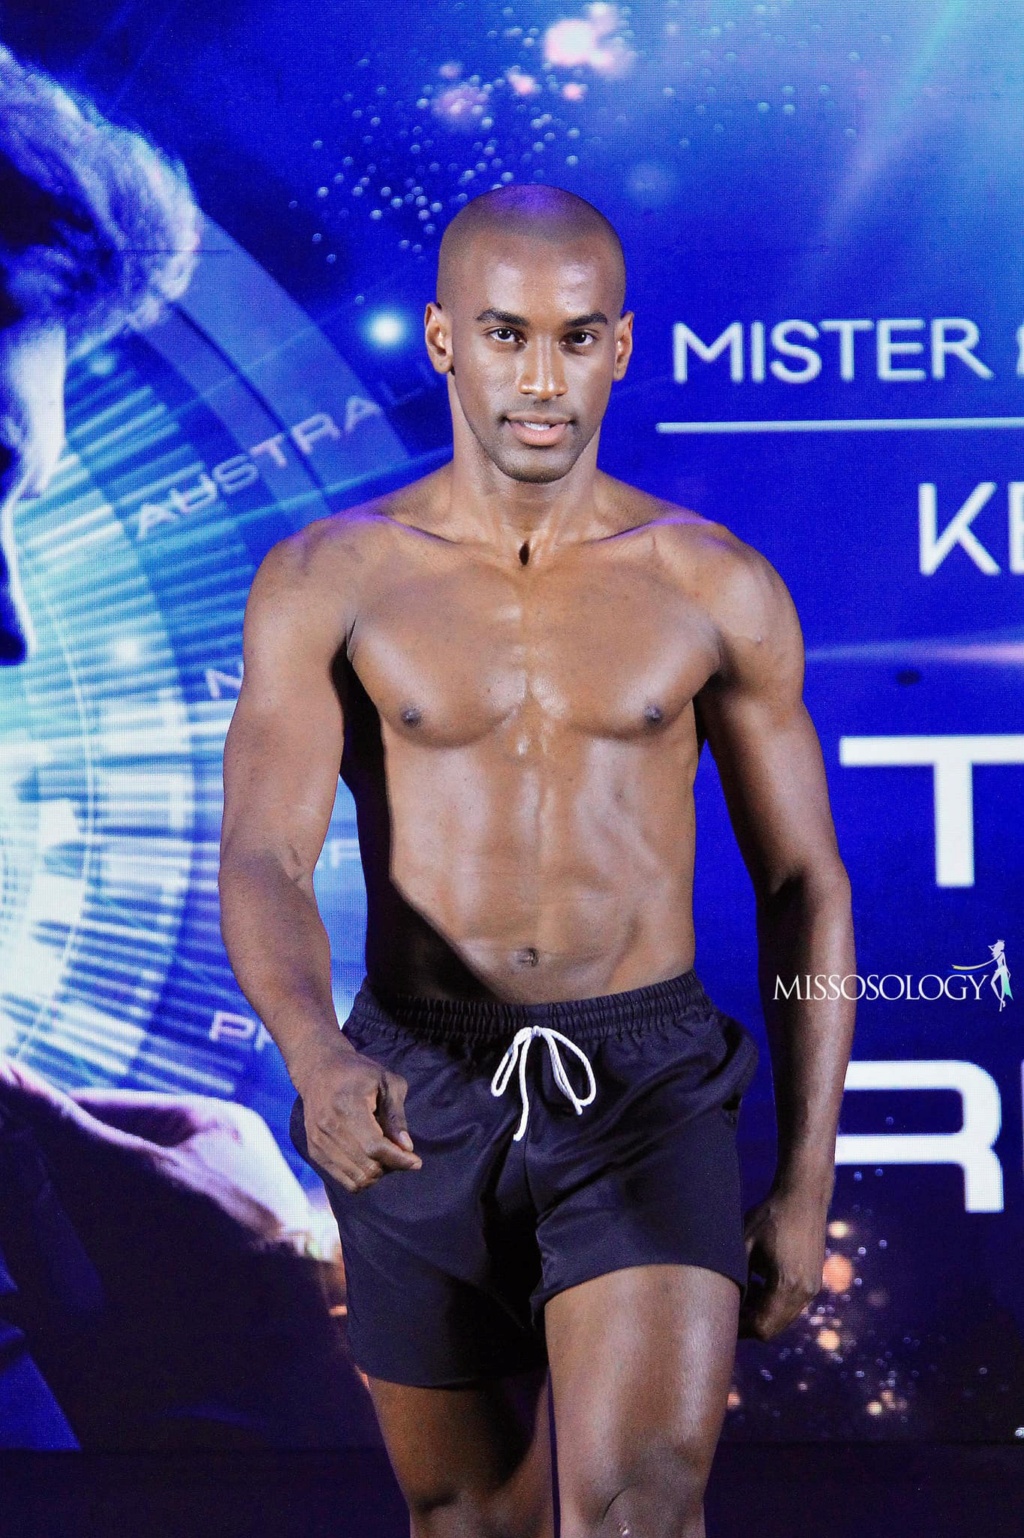 14th Mister International in Manila, Philippines - Oct 30th, 2022 - Winner is Dominican Republic 31284610